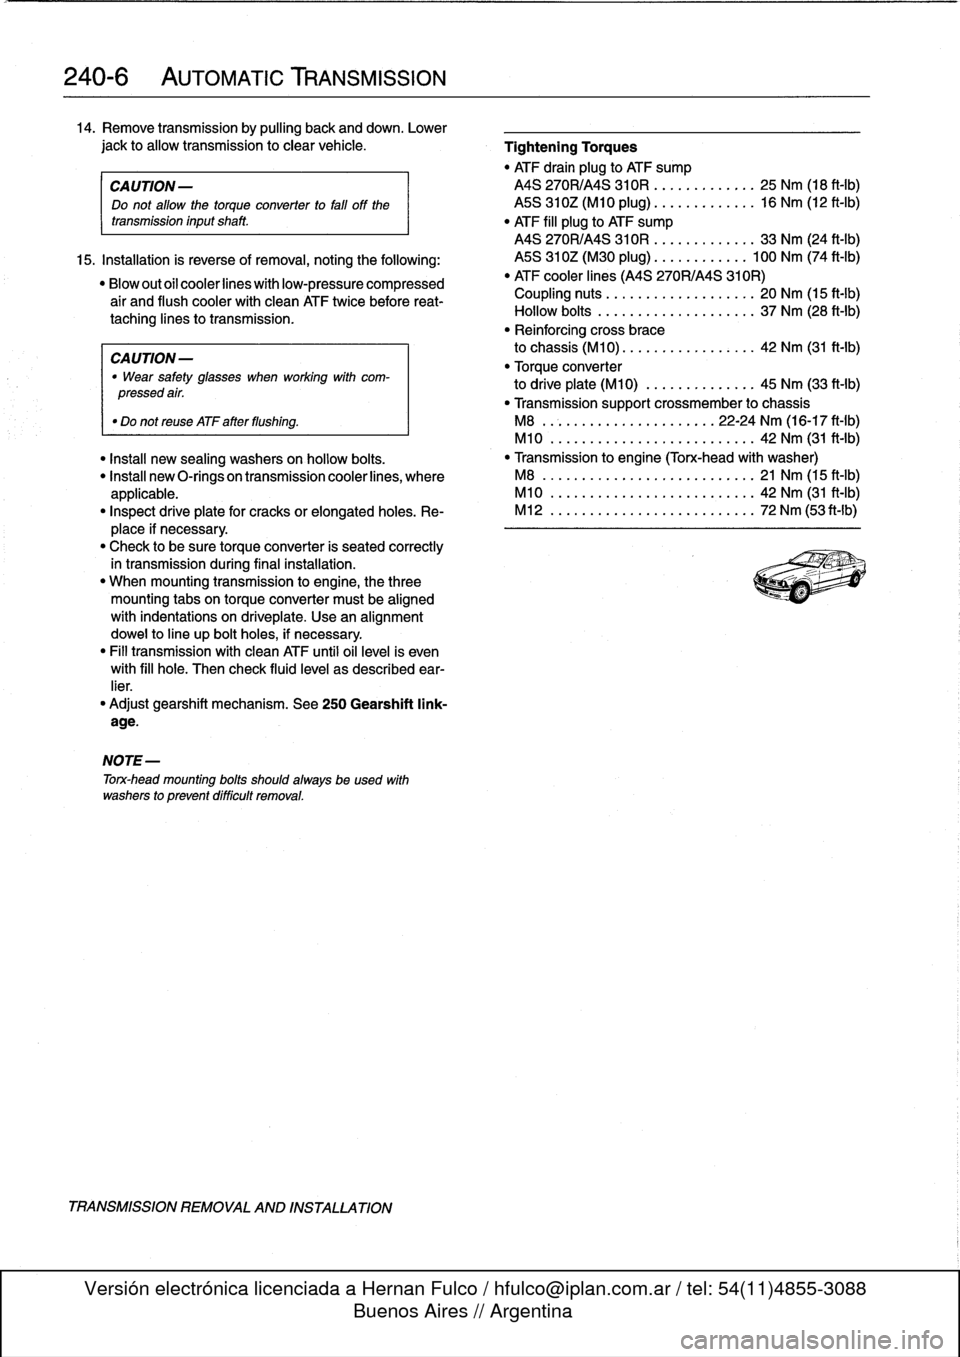 BMW 323i 1993 E36 Workshop Manual 
240-
6

	

AUTOMATIC
TRANSMISSION

14
.
Remove
transmission
by
pulling
back
and
down
.
Lower

jack
to
allow
transmission
to
clear
vehicle
.

	

Tightening
Torques

"
ATF
drain
plug
to
ATF
sump

CA
UT